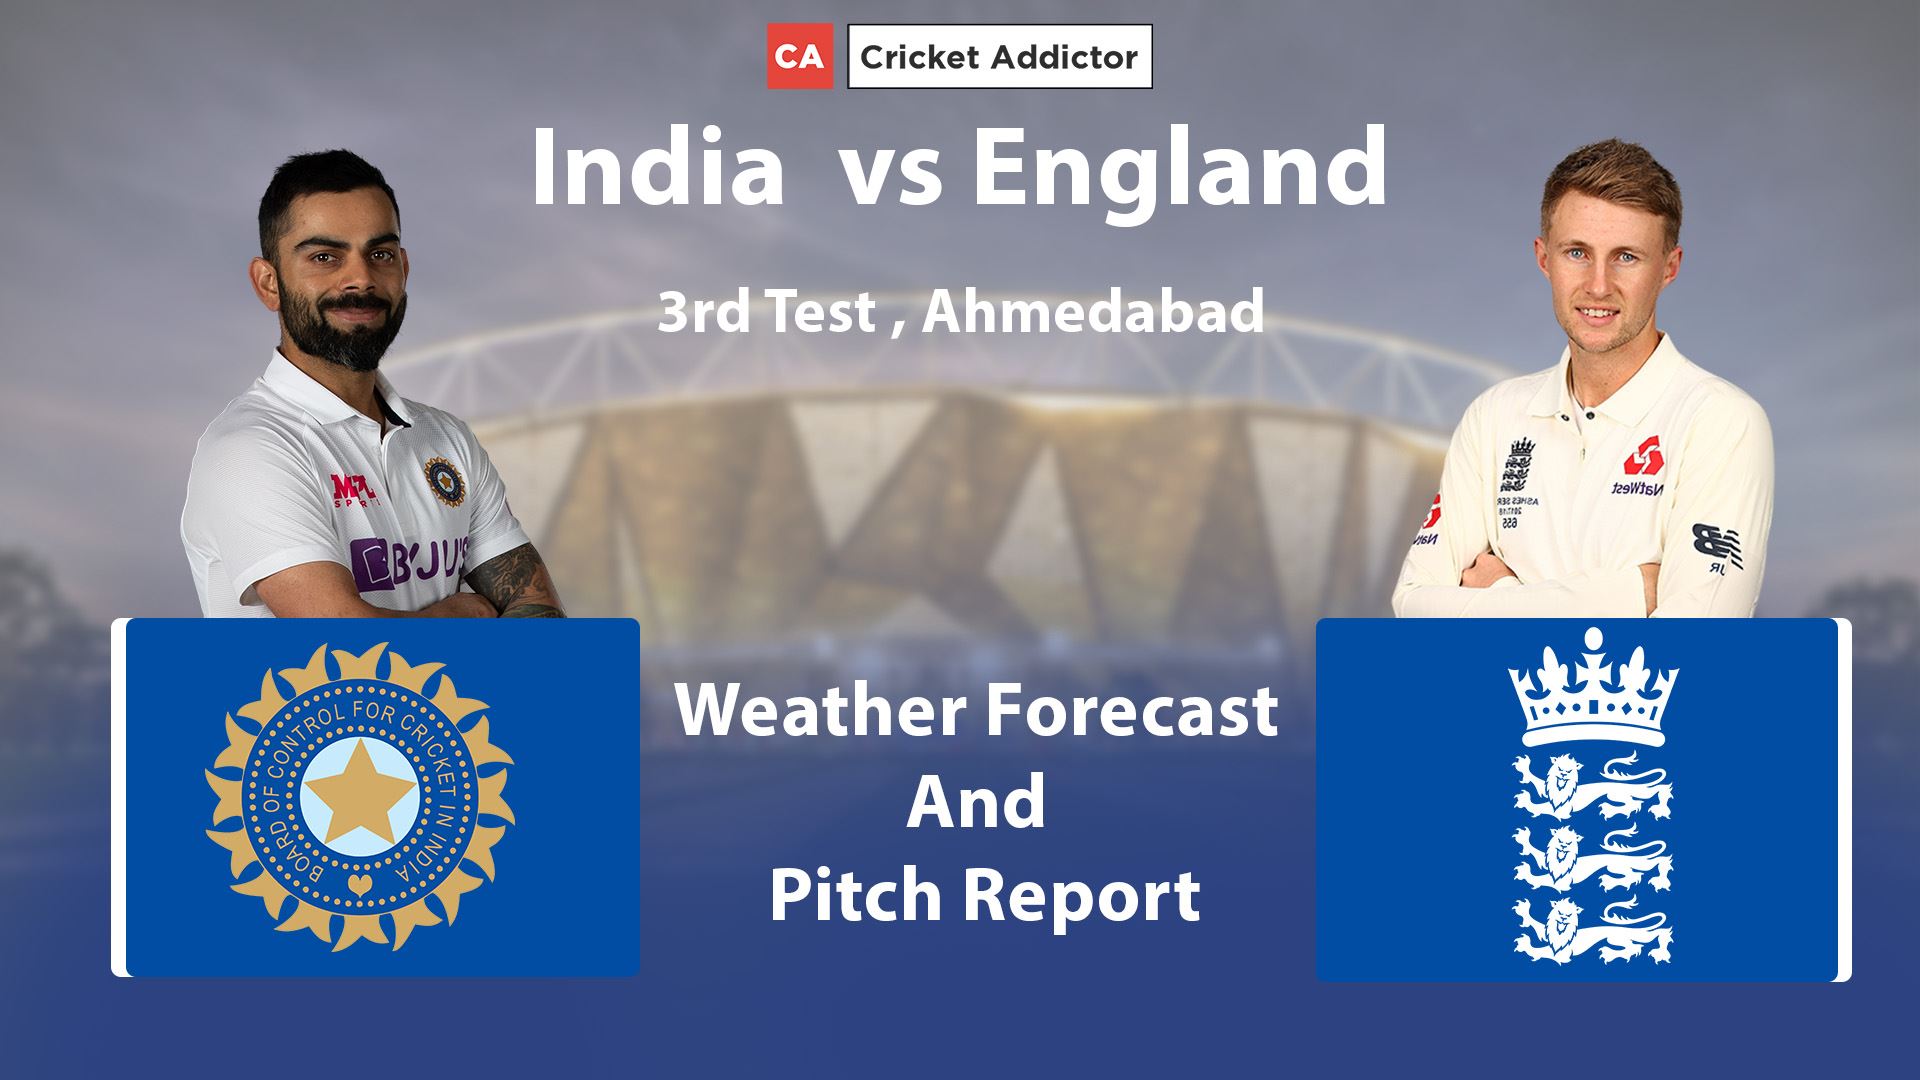 India vs England 2021, 3rd Test: Weather Forecast And Pitch Report